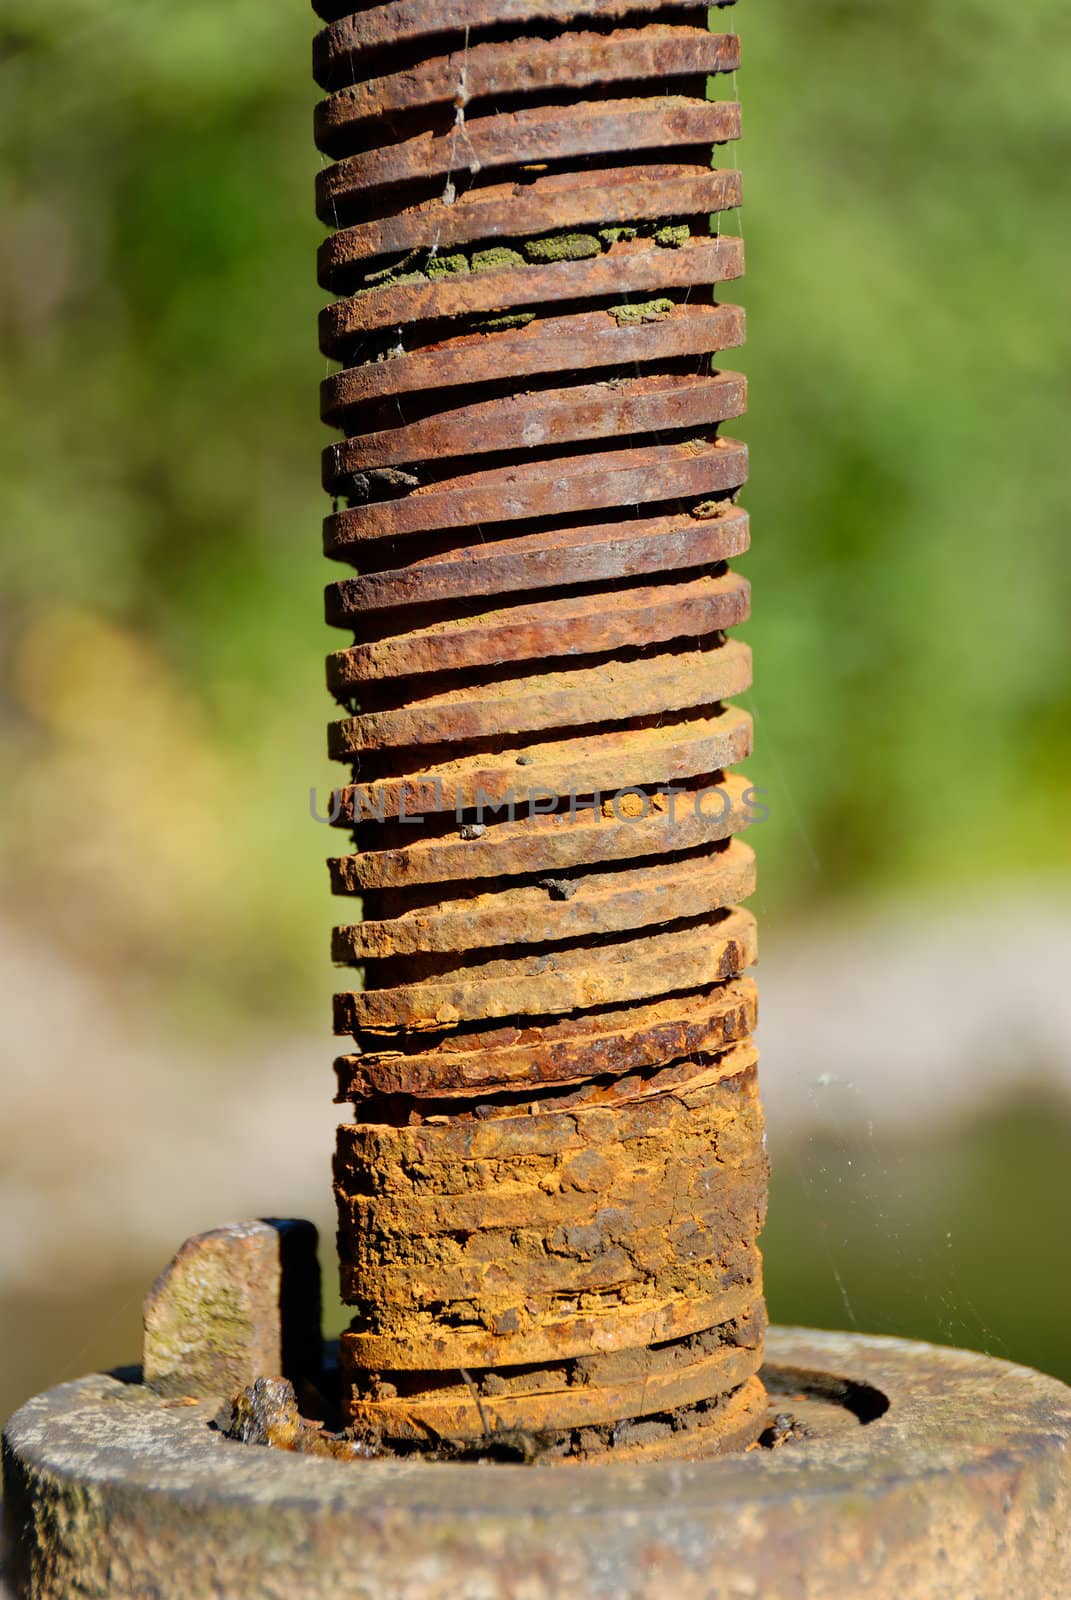 Screw of a flood gate, covered with a layer of rust
